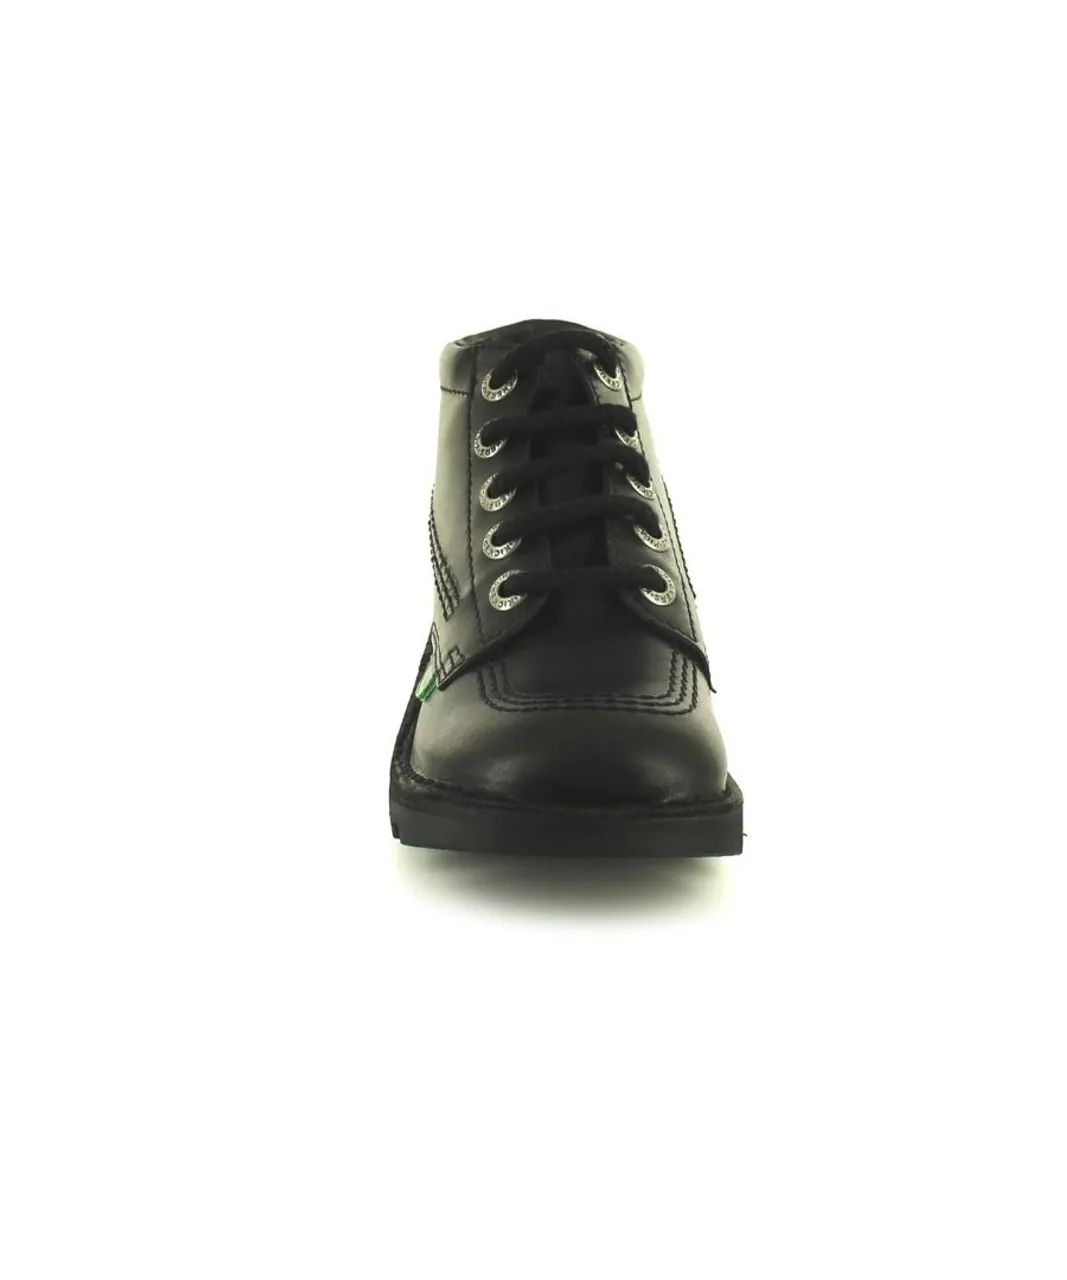 Kickers Boys Childrens Boots Hi Core y Leather Lace Up black